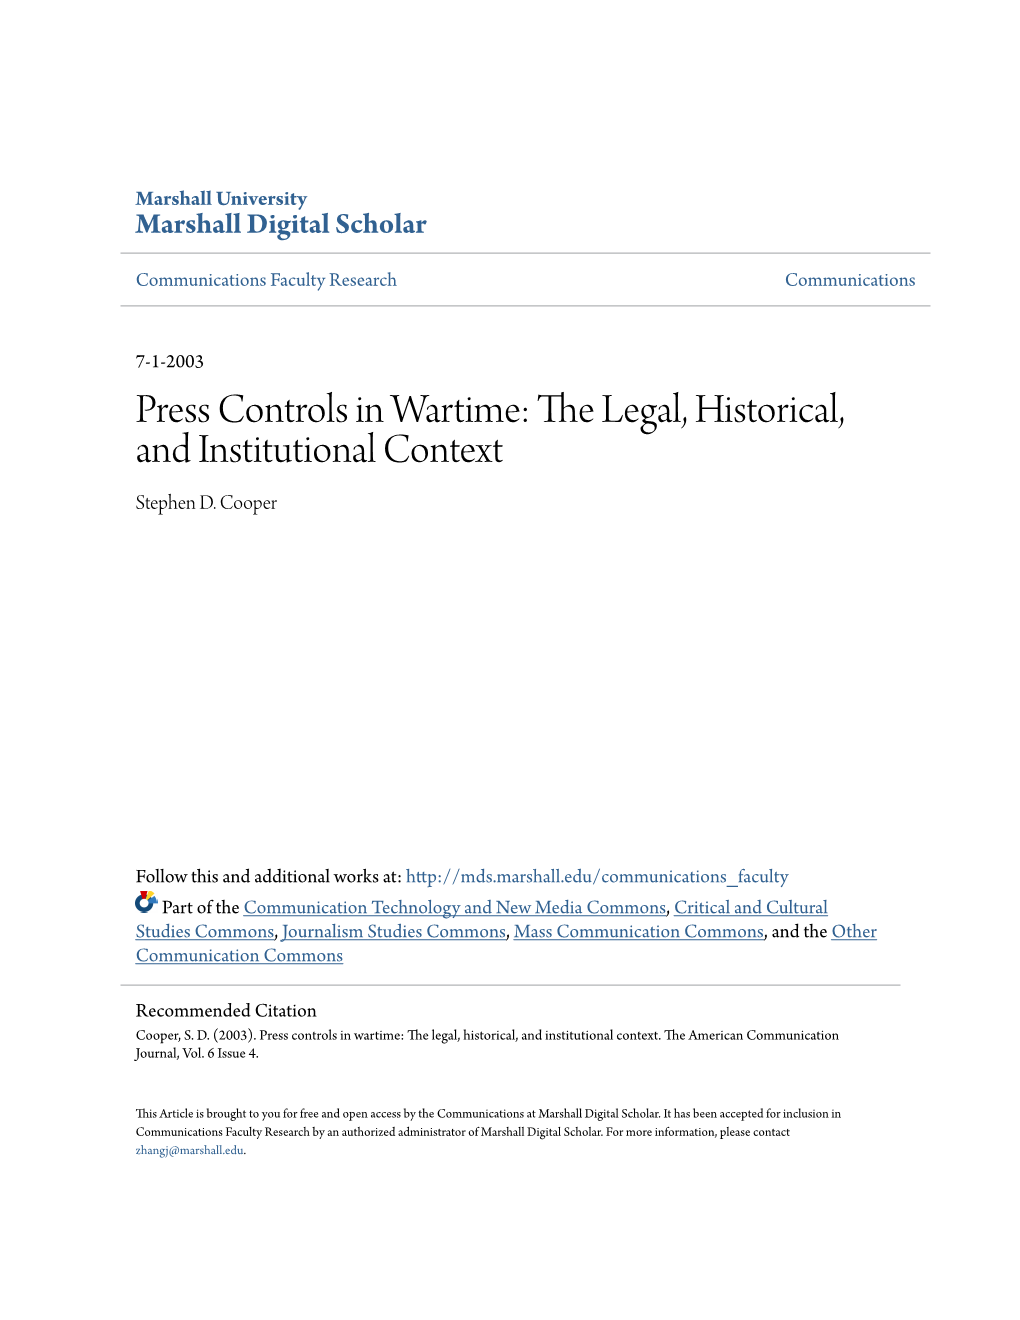 Press Controls in Wartime: the Legal, Historical, and Institutional Context Stephen D